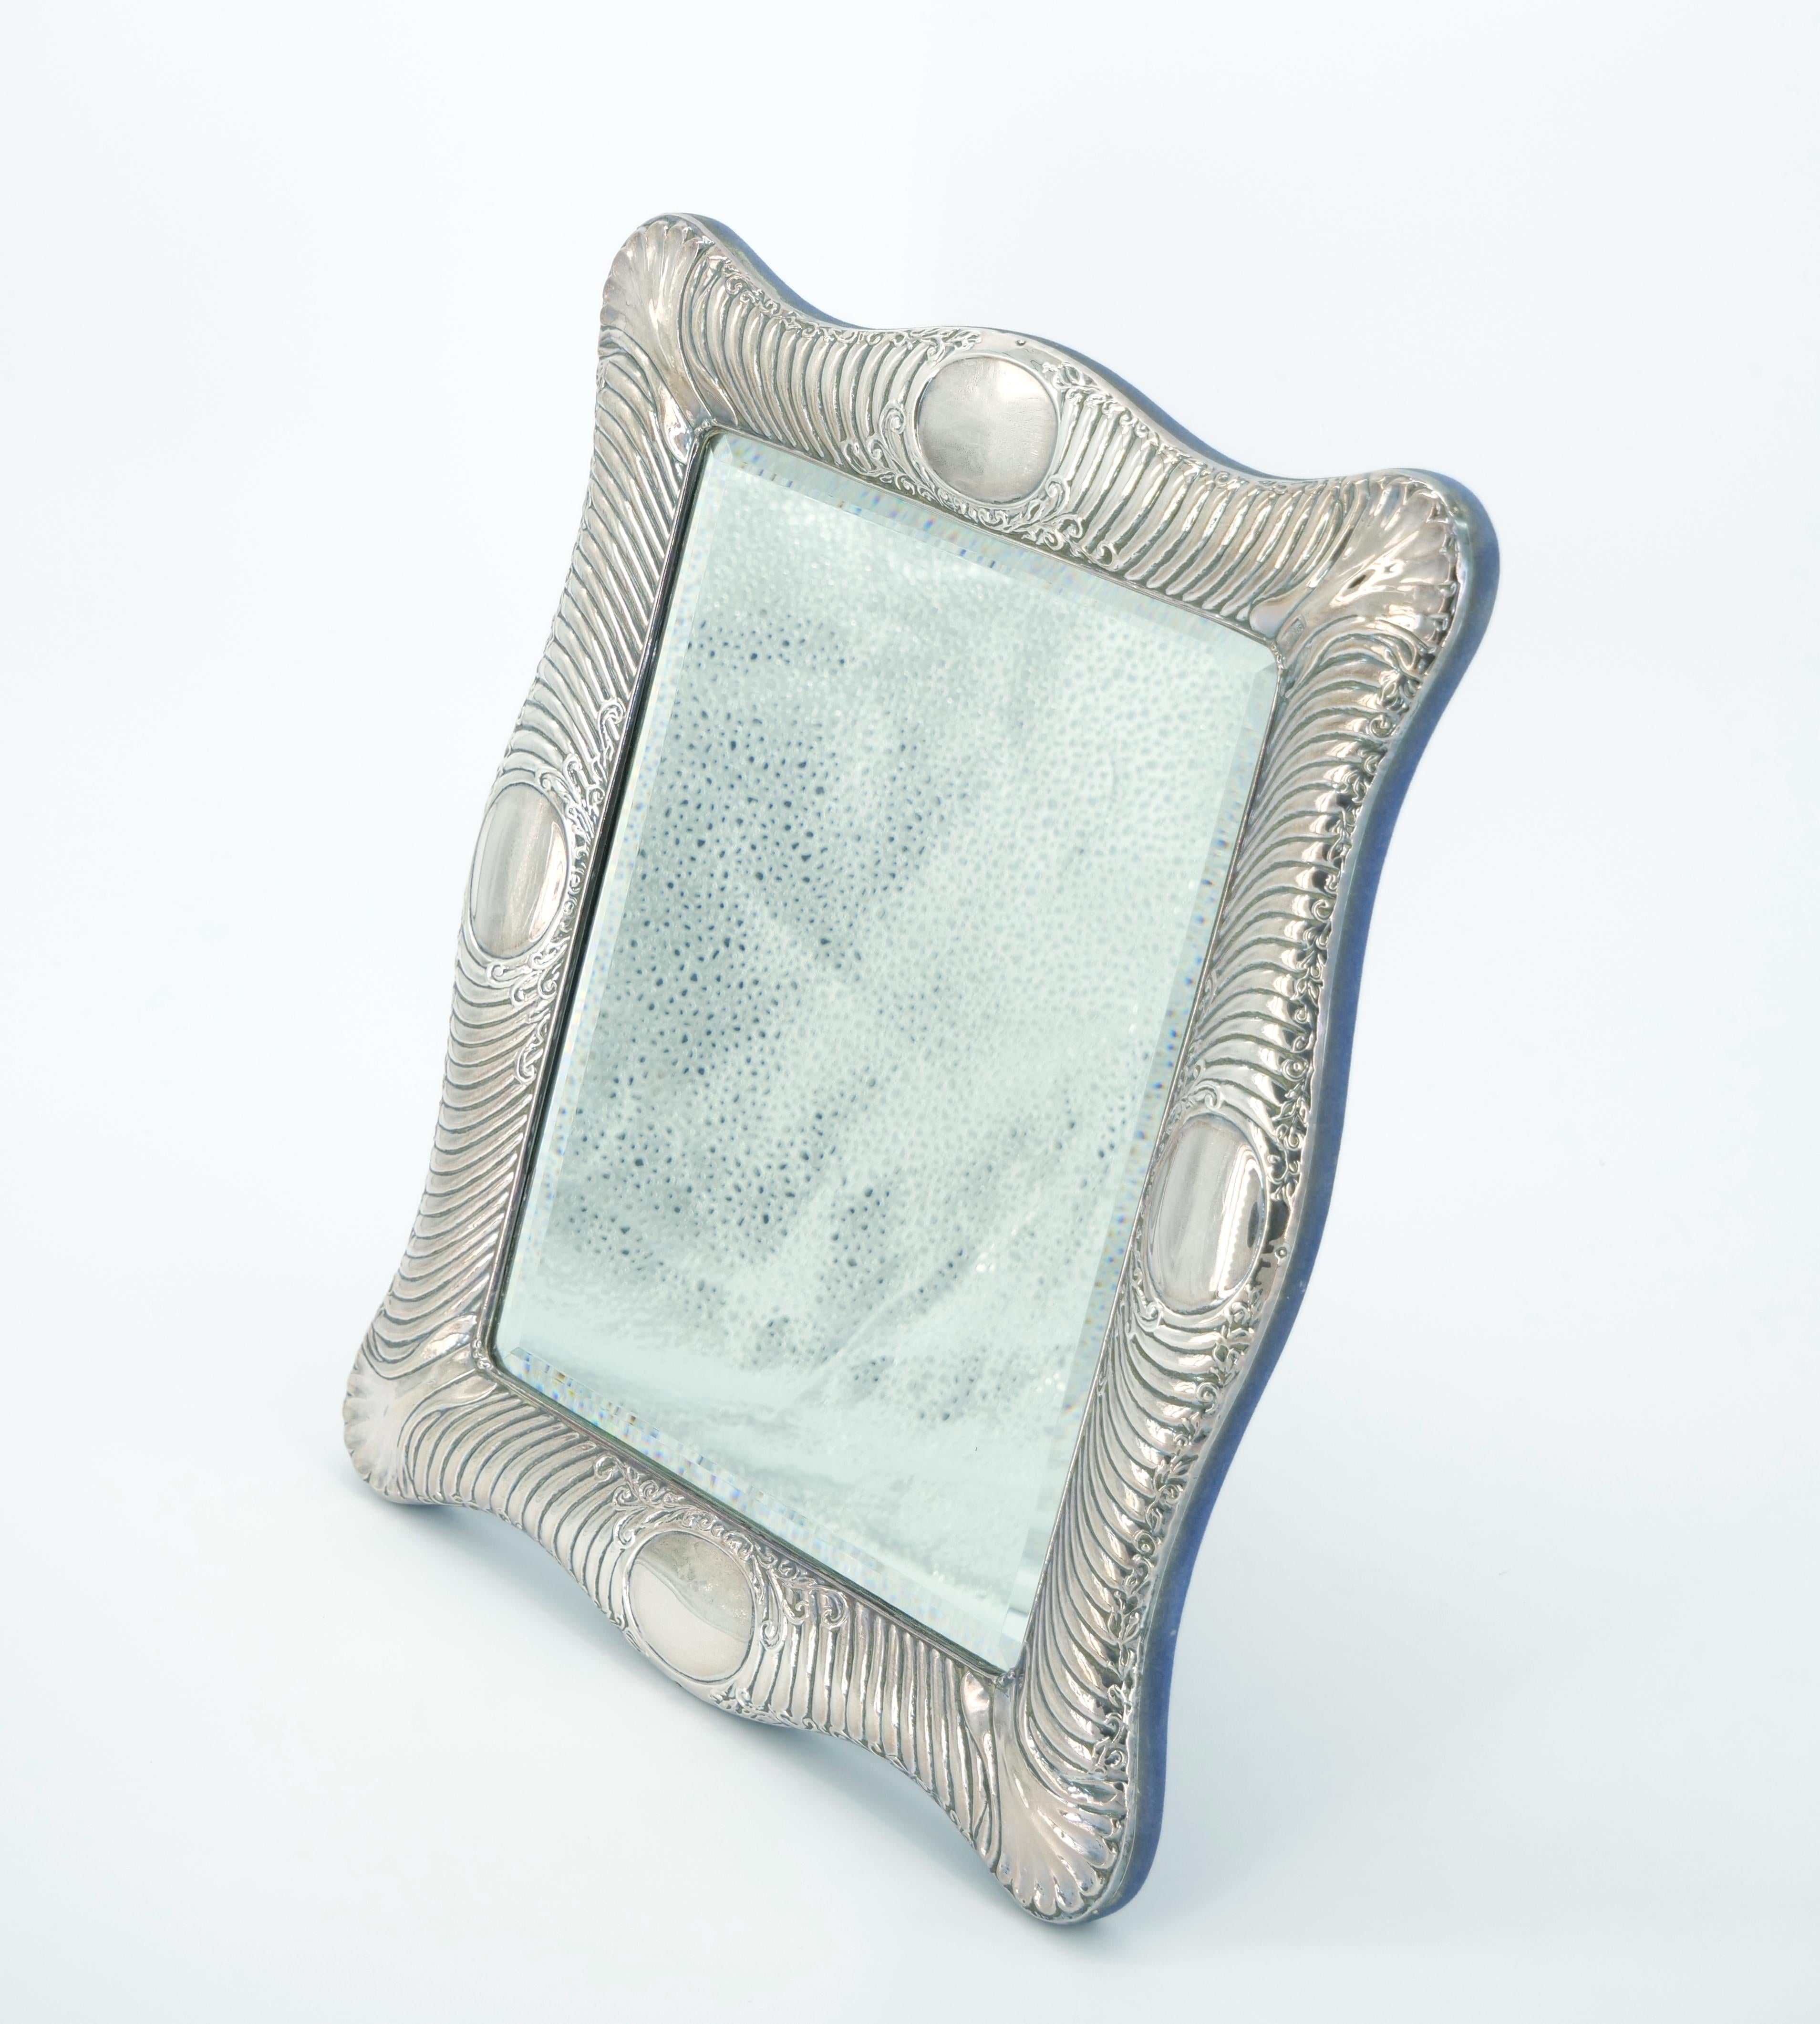 Enhance your vanity with this exquisite English Sterling Silver Framed Rectangle Table Mirror—a vintage masterpiece of refined craftsmanship. The thick sterling silver frame is adorned with intricate engraved details, featuring a thin wreath garland